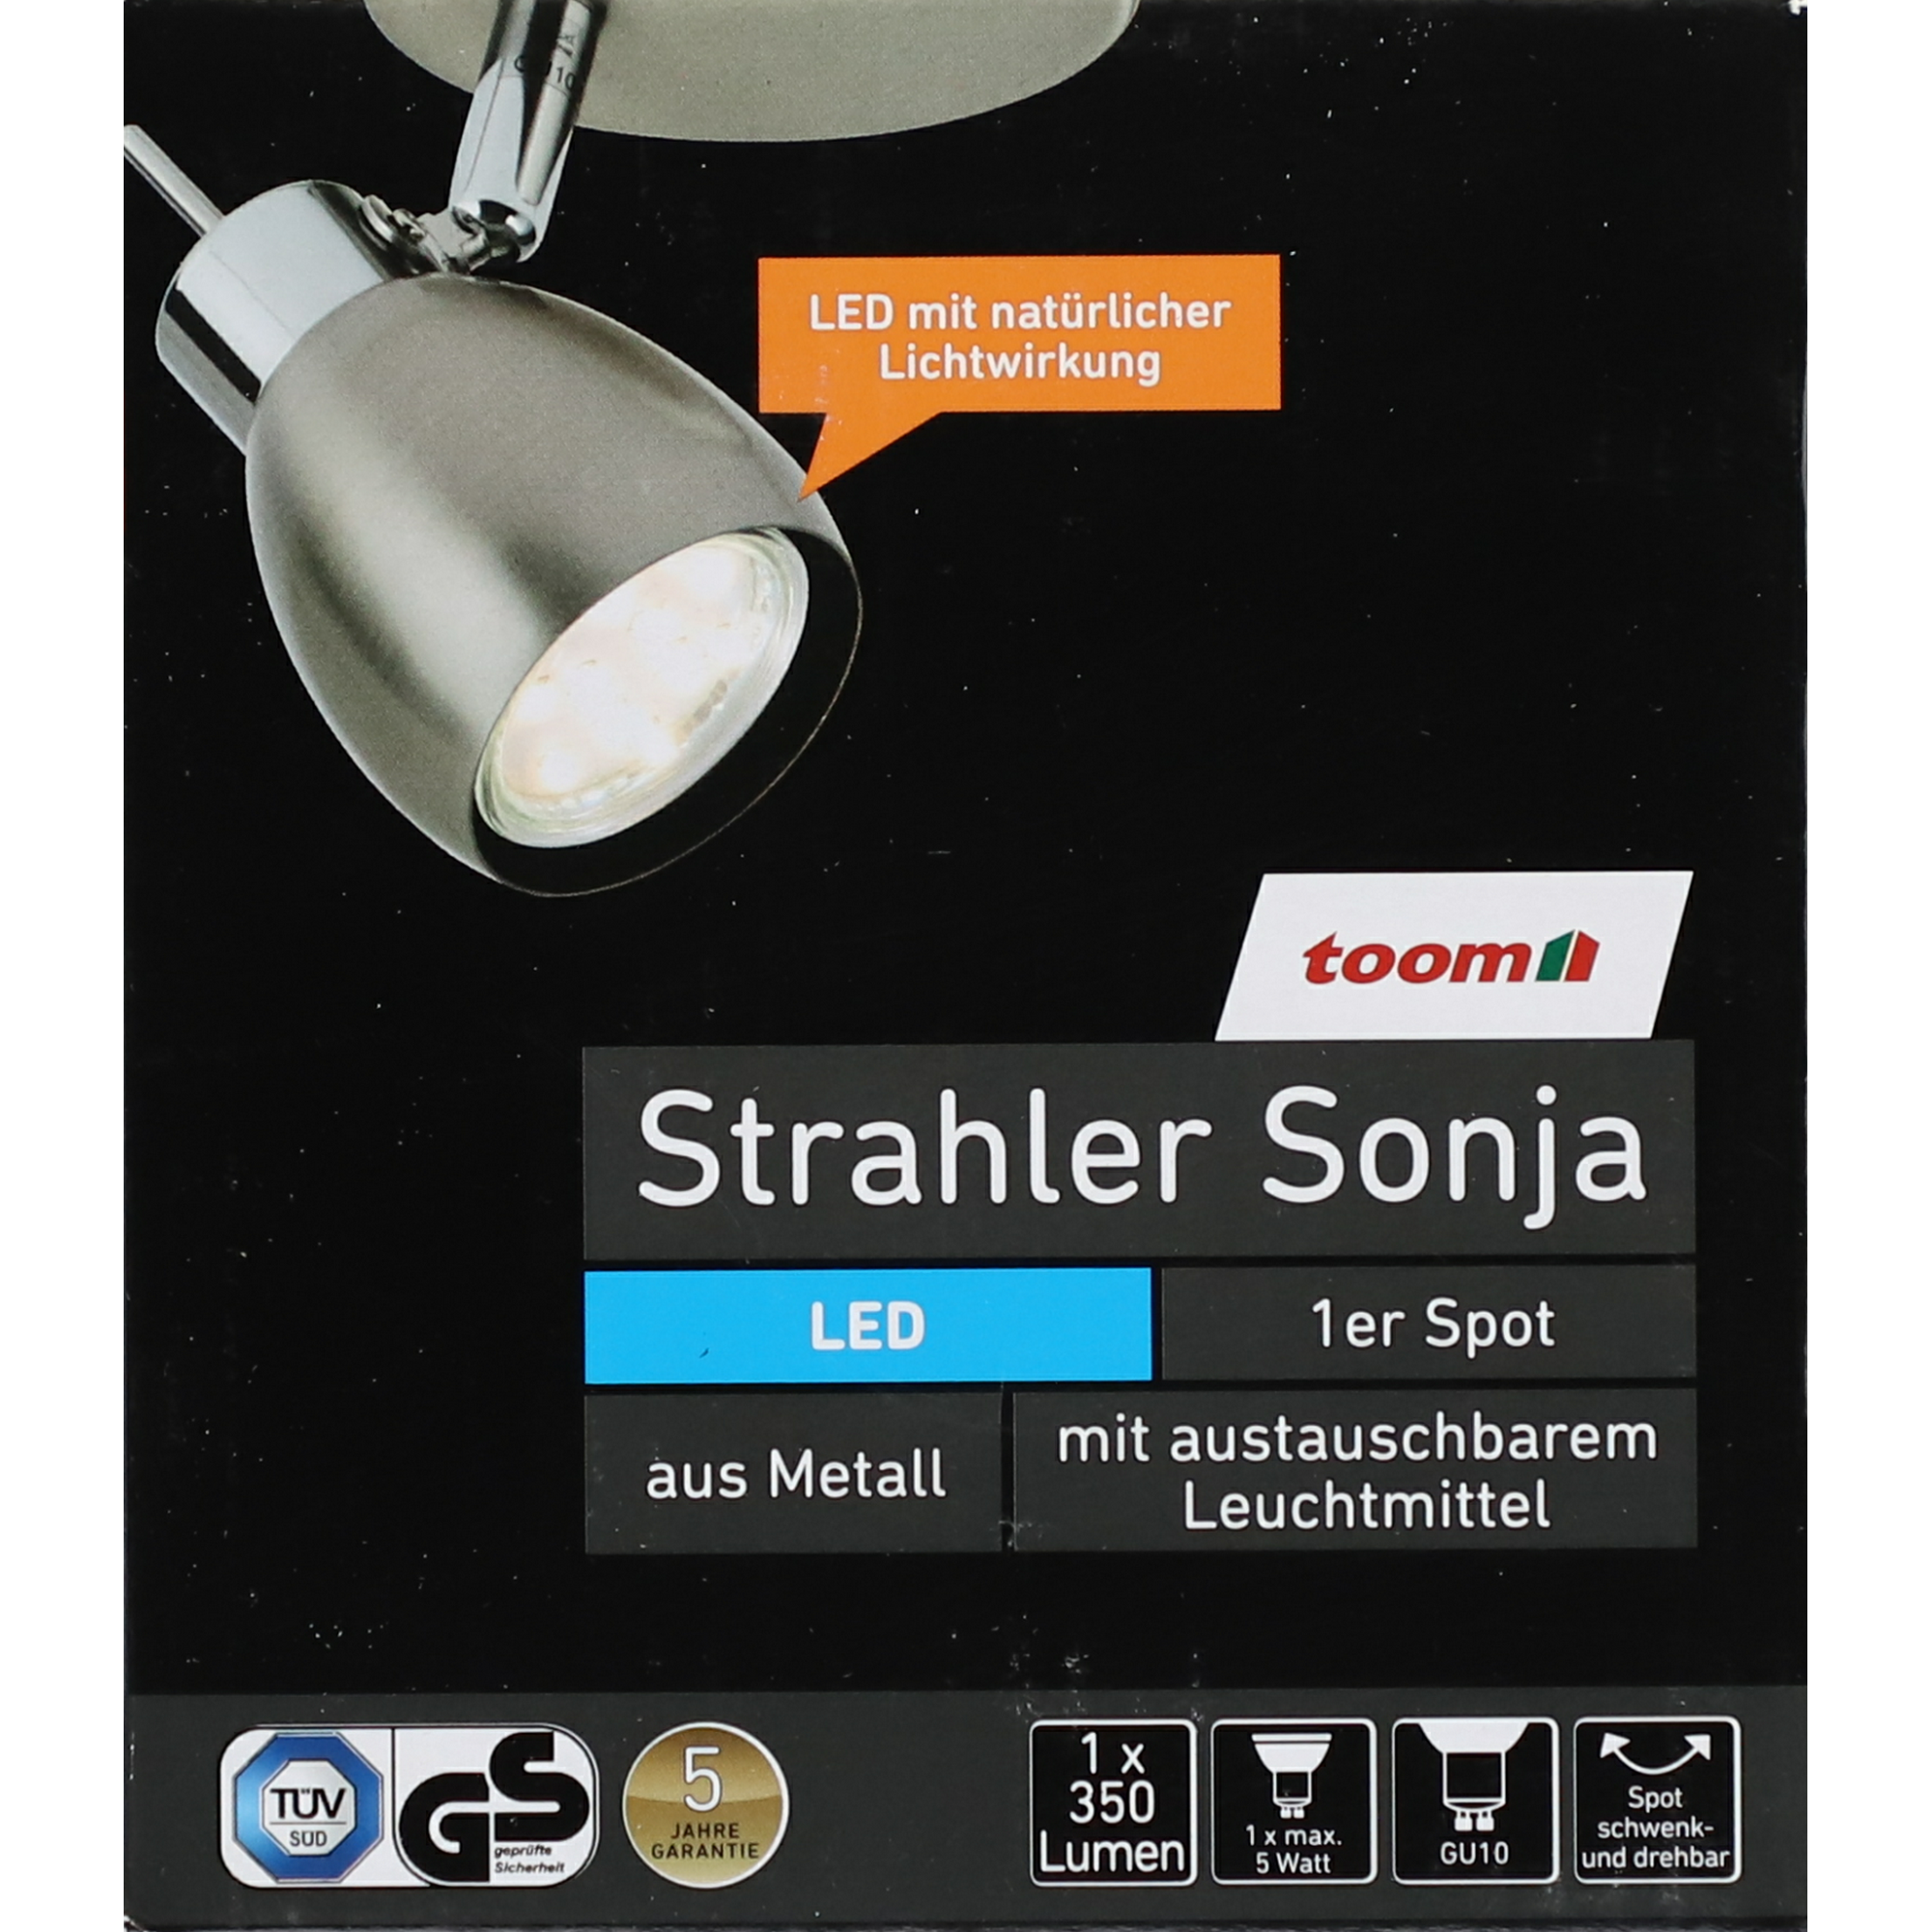 LED-Wohnraumstrahler 'Sonja' 1-flammig + product picture